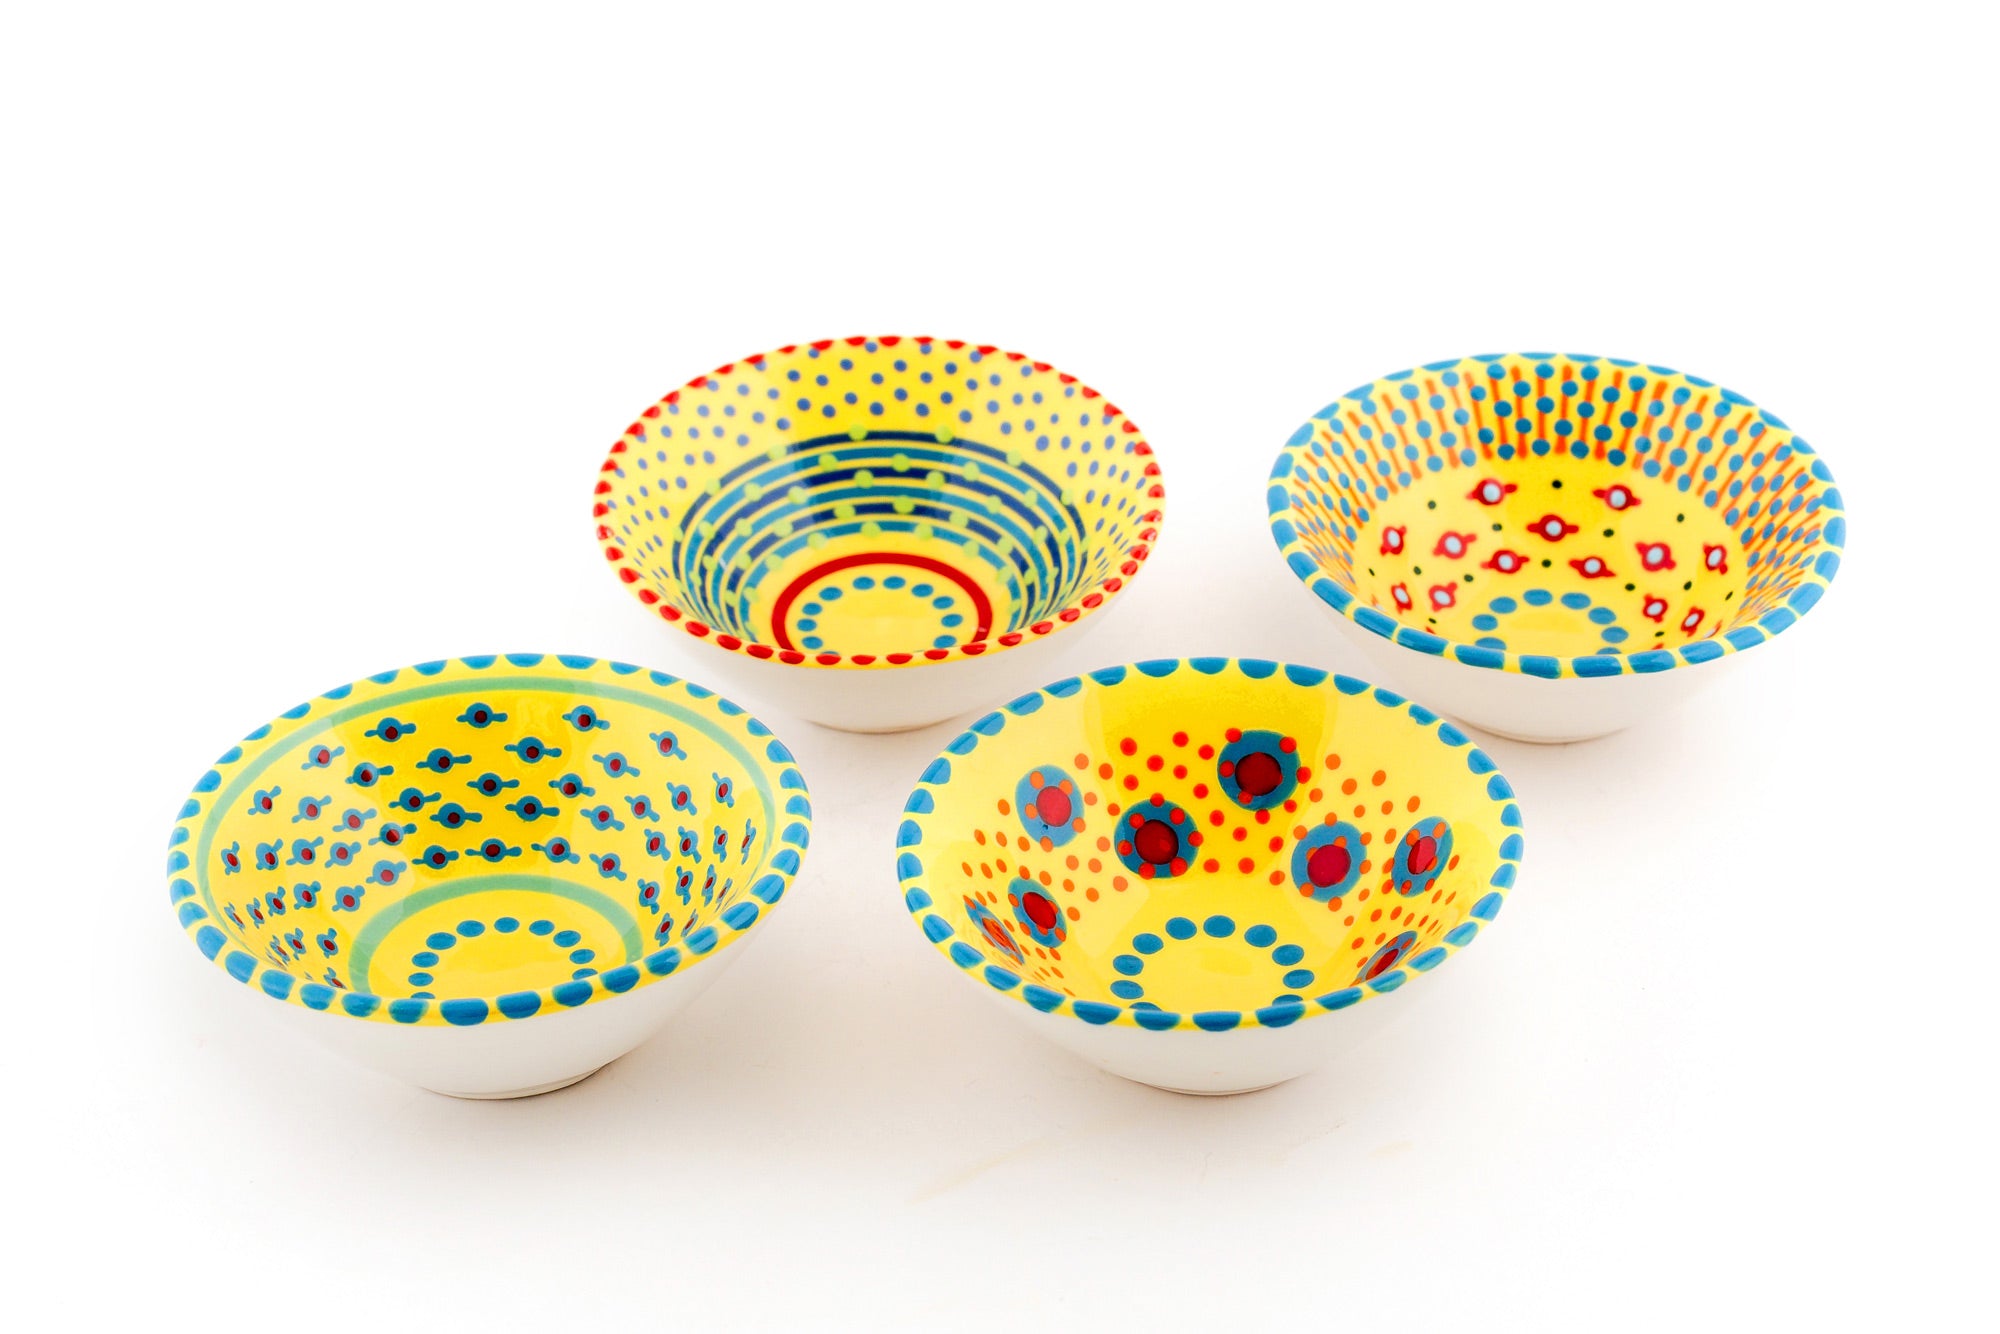 4 Yellow tiny bowls. Yellow base color with variations of the designs on the blue in read, orange, jasper green, baby blue and indigo.